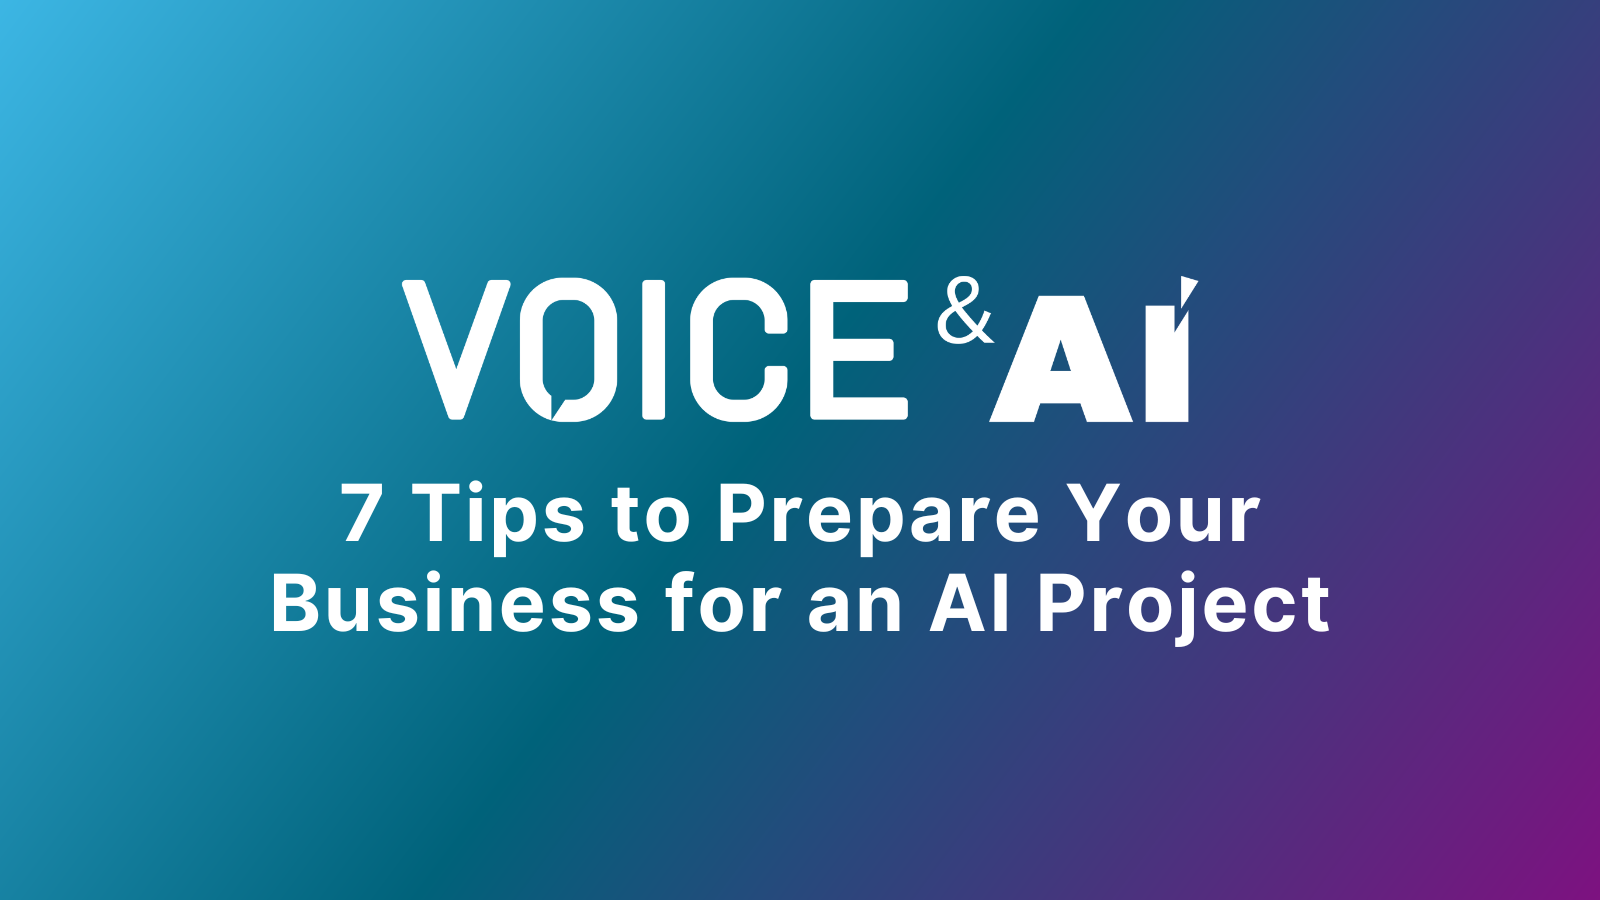 7 Tips to Prepare Your Business for an AI Project